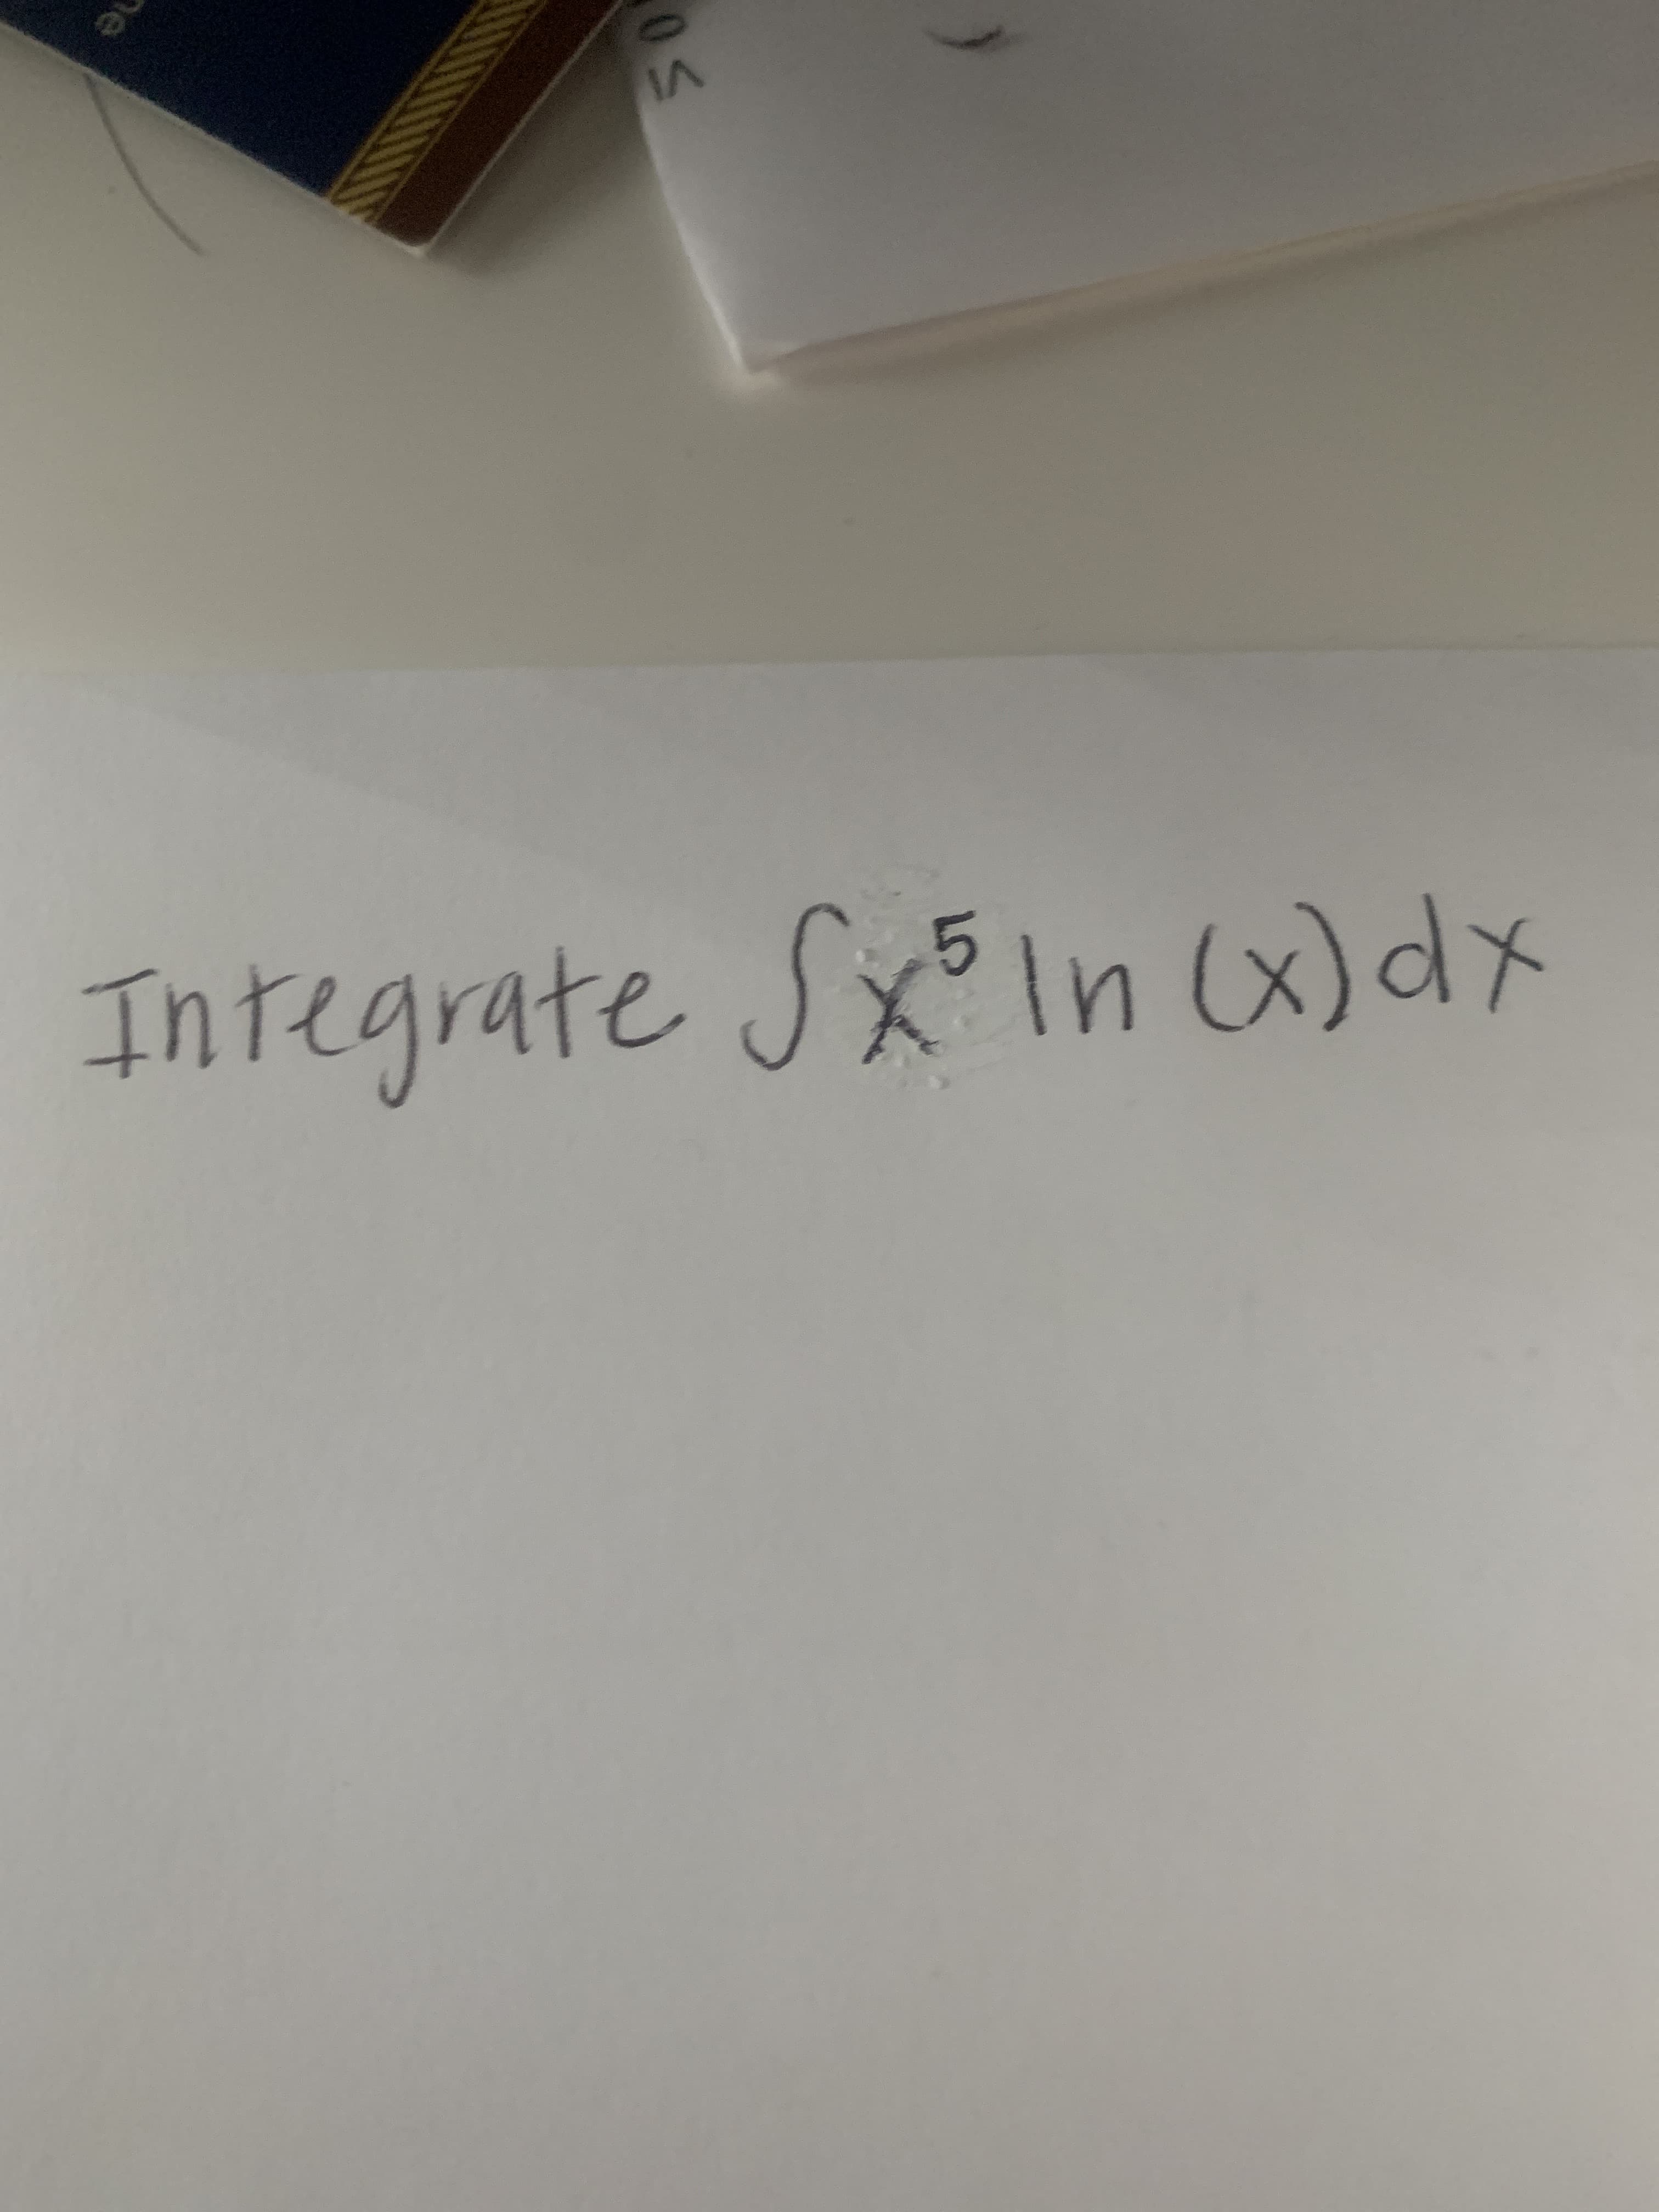 Integrate SX³1IN x)dx
